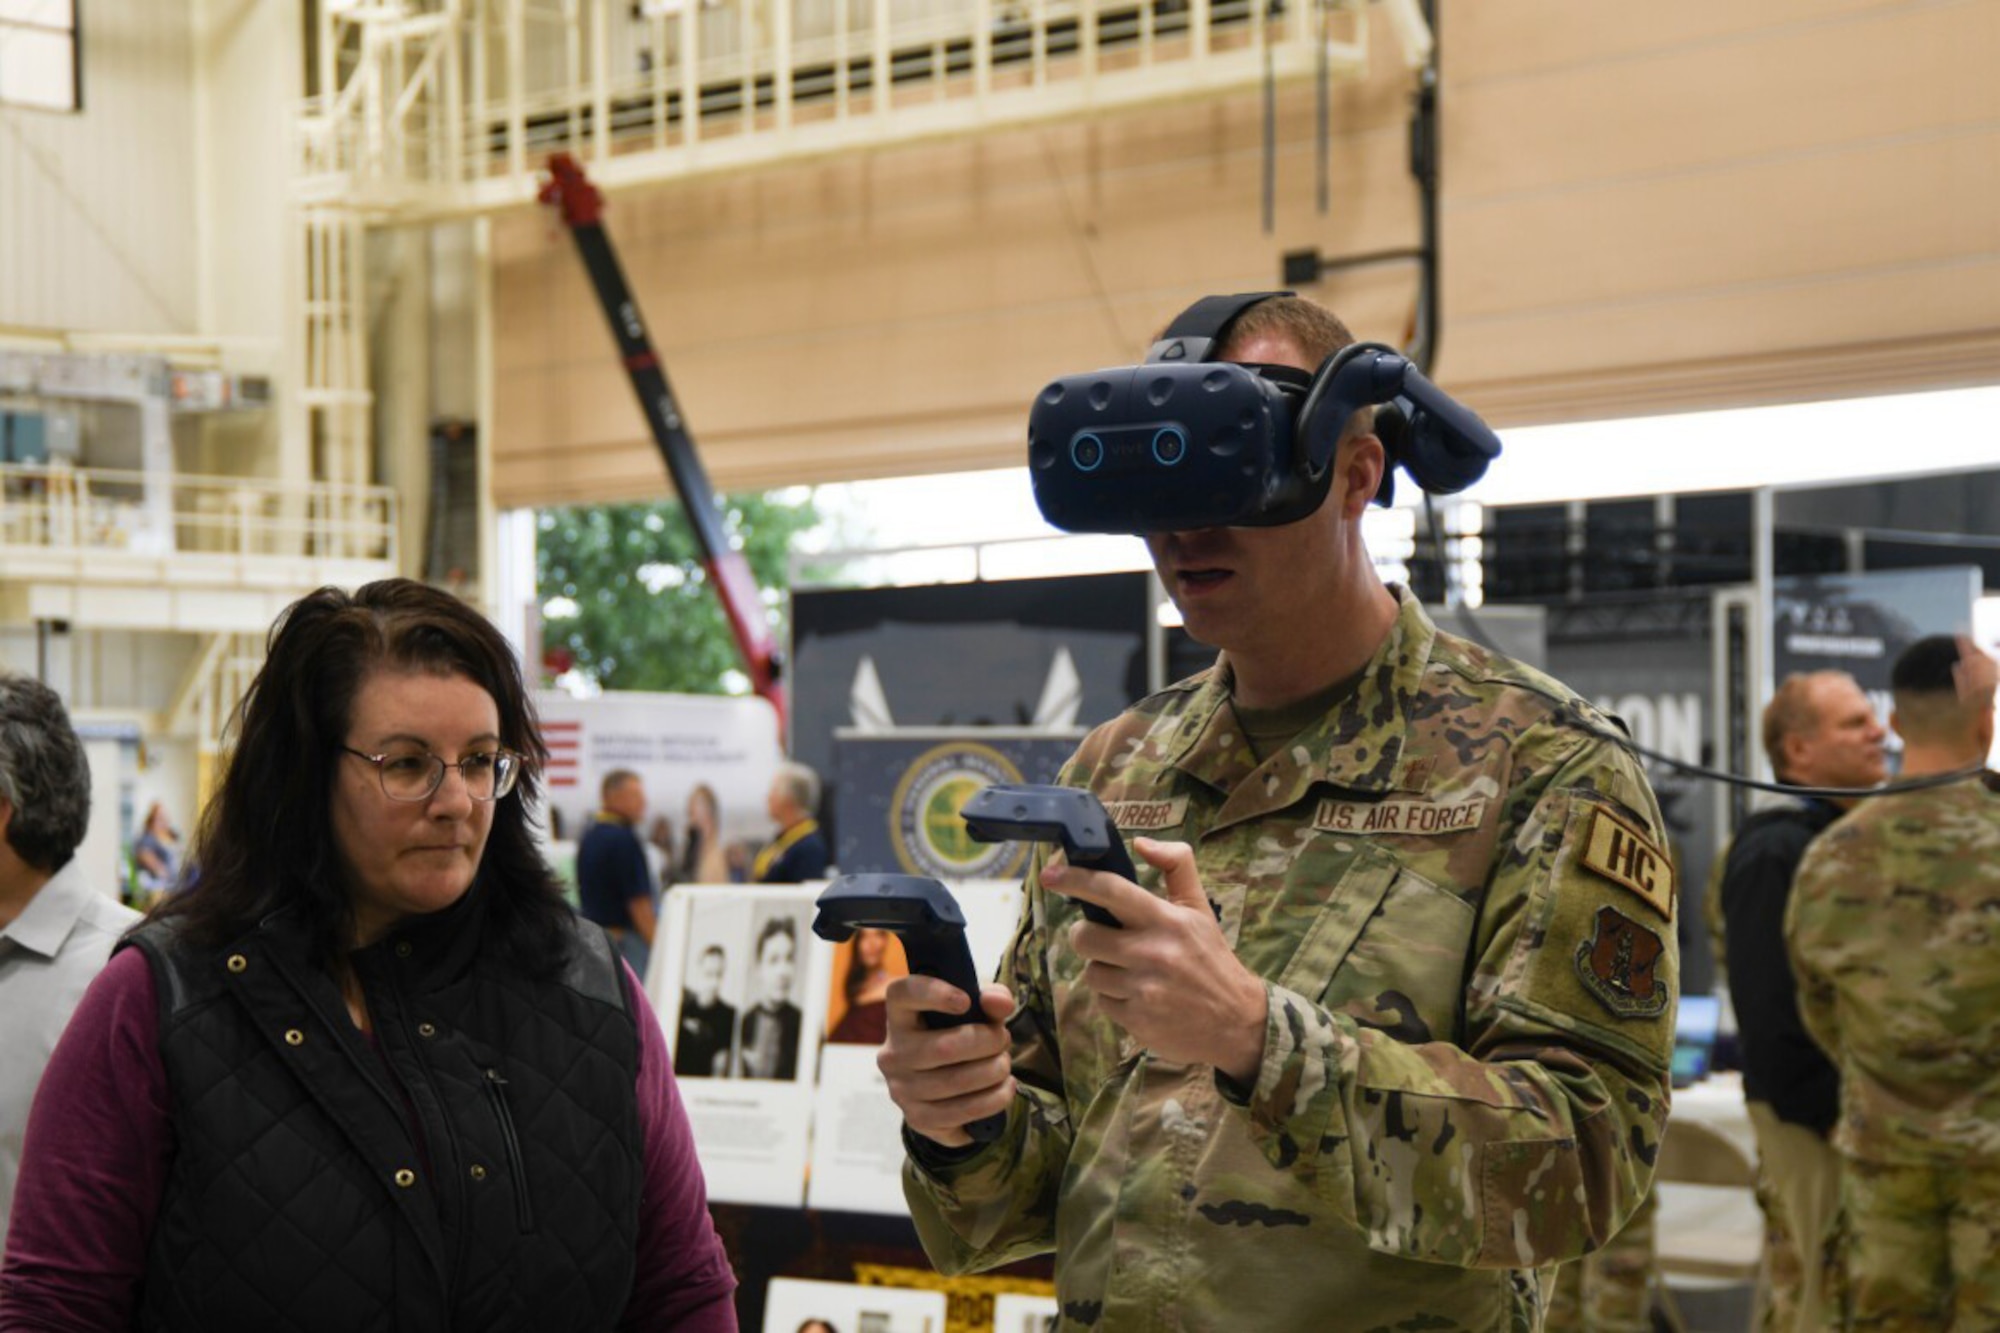 The U.S. Army Combat Capabilities Development Command Soldier Center, or DEVCOM SC, recently participated in a STEM Exploration Open House hosted by the Rhode Island National Guard at the Quonset National Guard Base in North Kingstown, Rhode Island. DEVCOM SC’s Christina Caruso looks on as a STEM event participant tries out Augmented Reality/Virtual Reality capabilities.